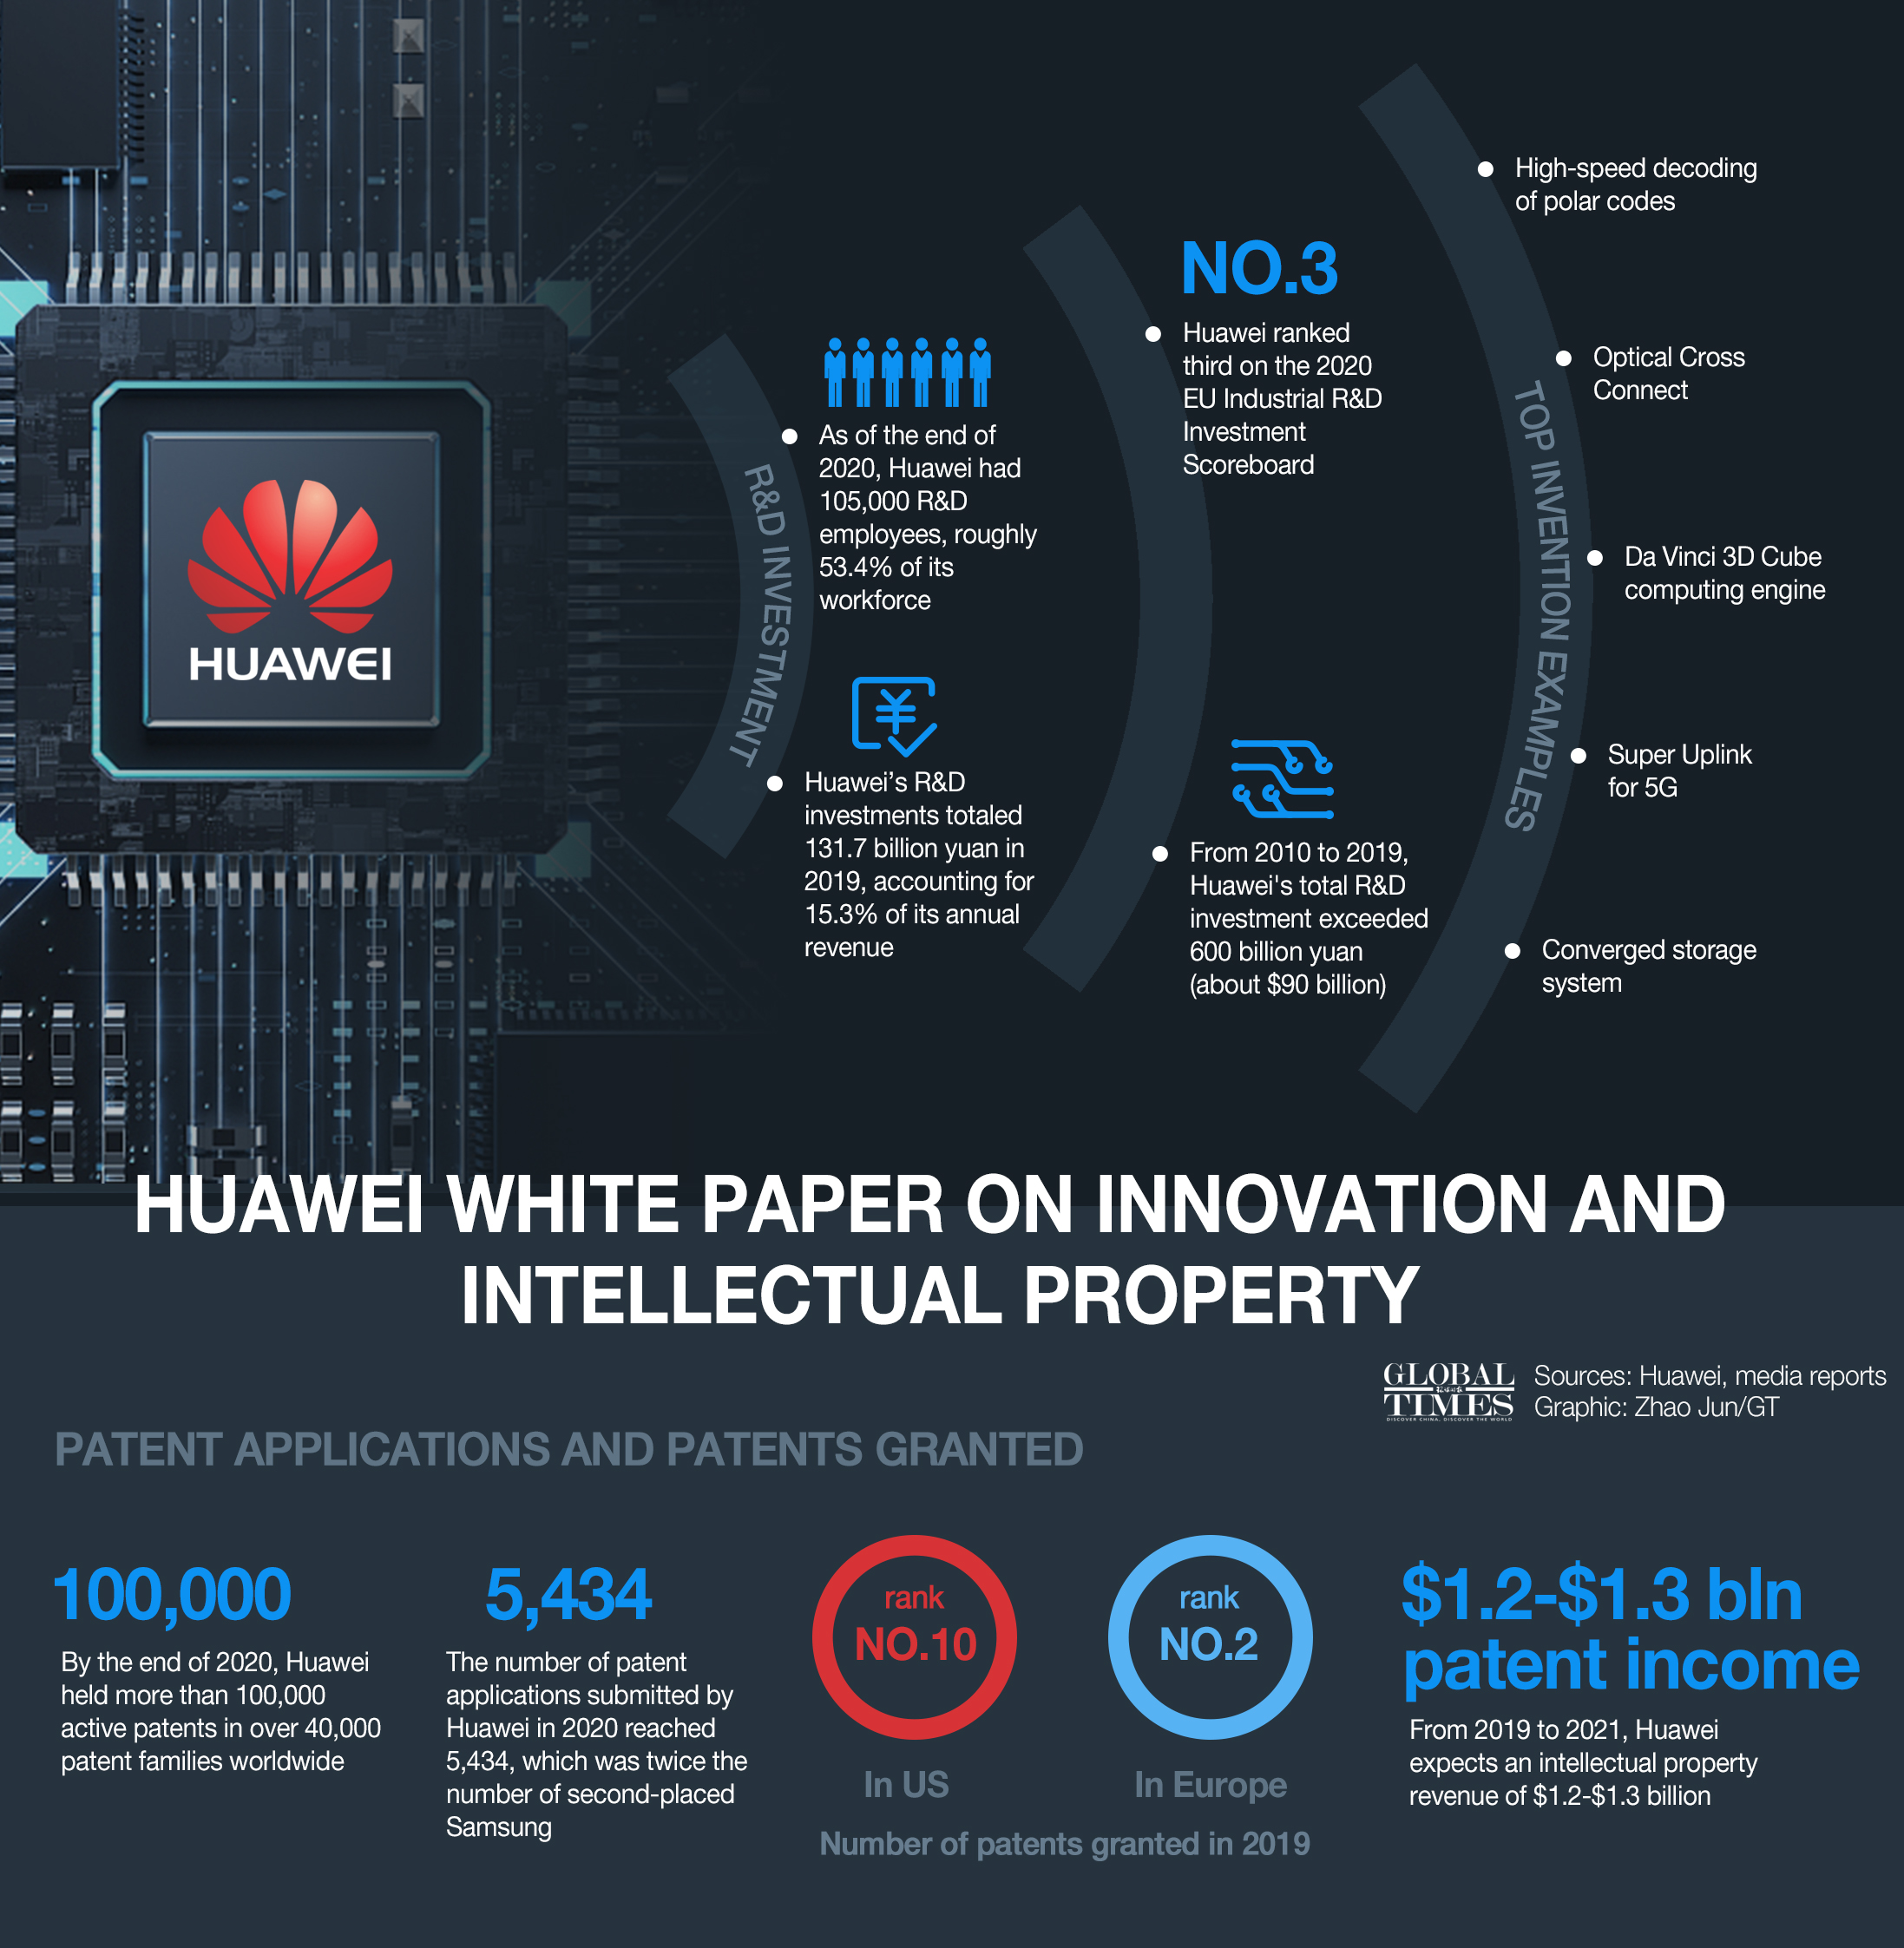 Huawei White Paper on Innovation and Intellectual Property. Graphic: GT